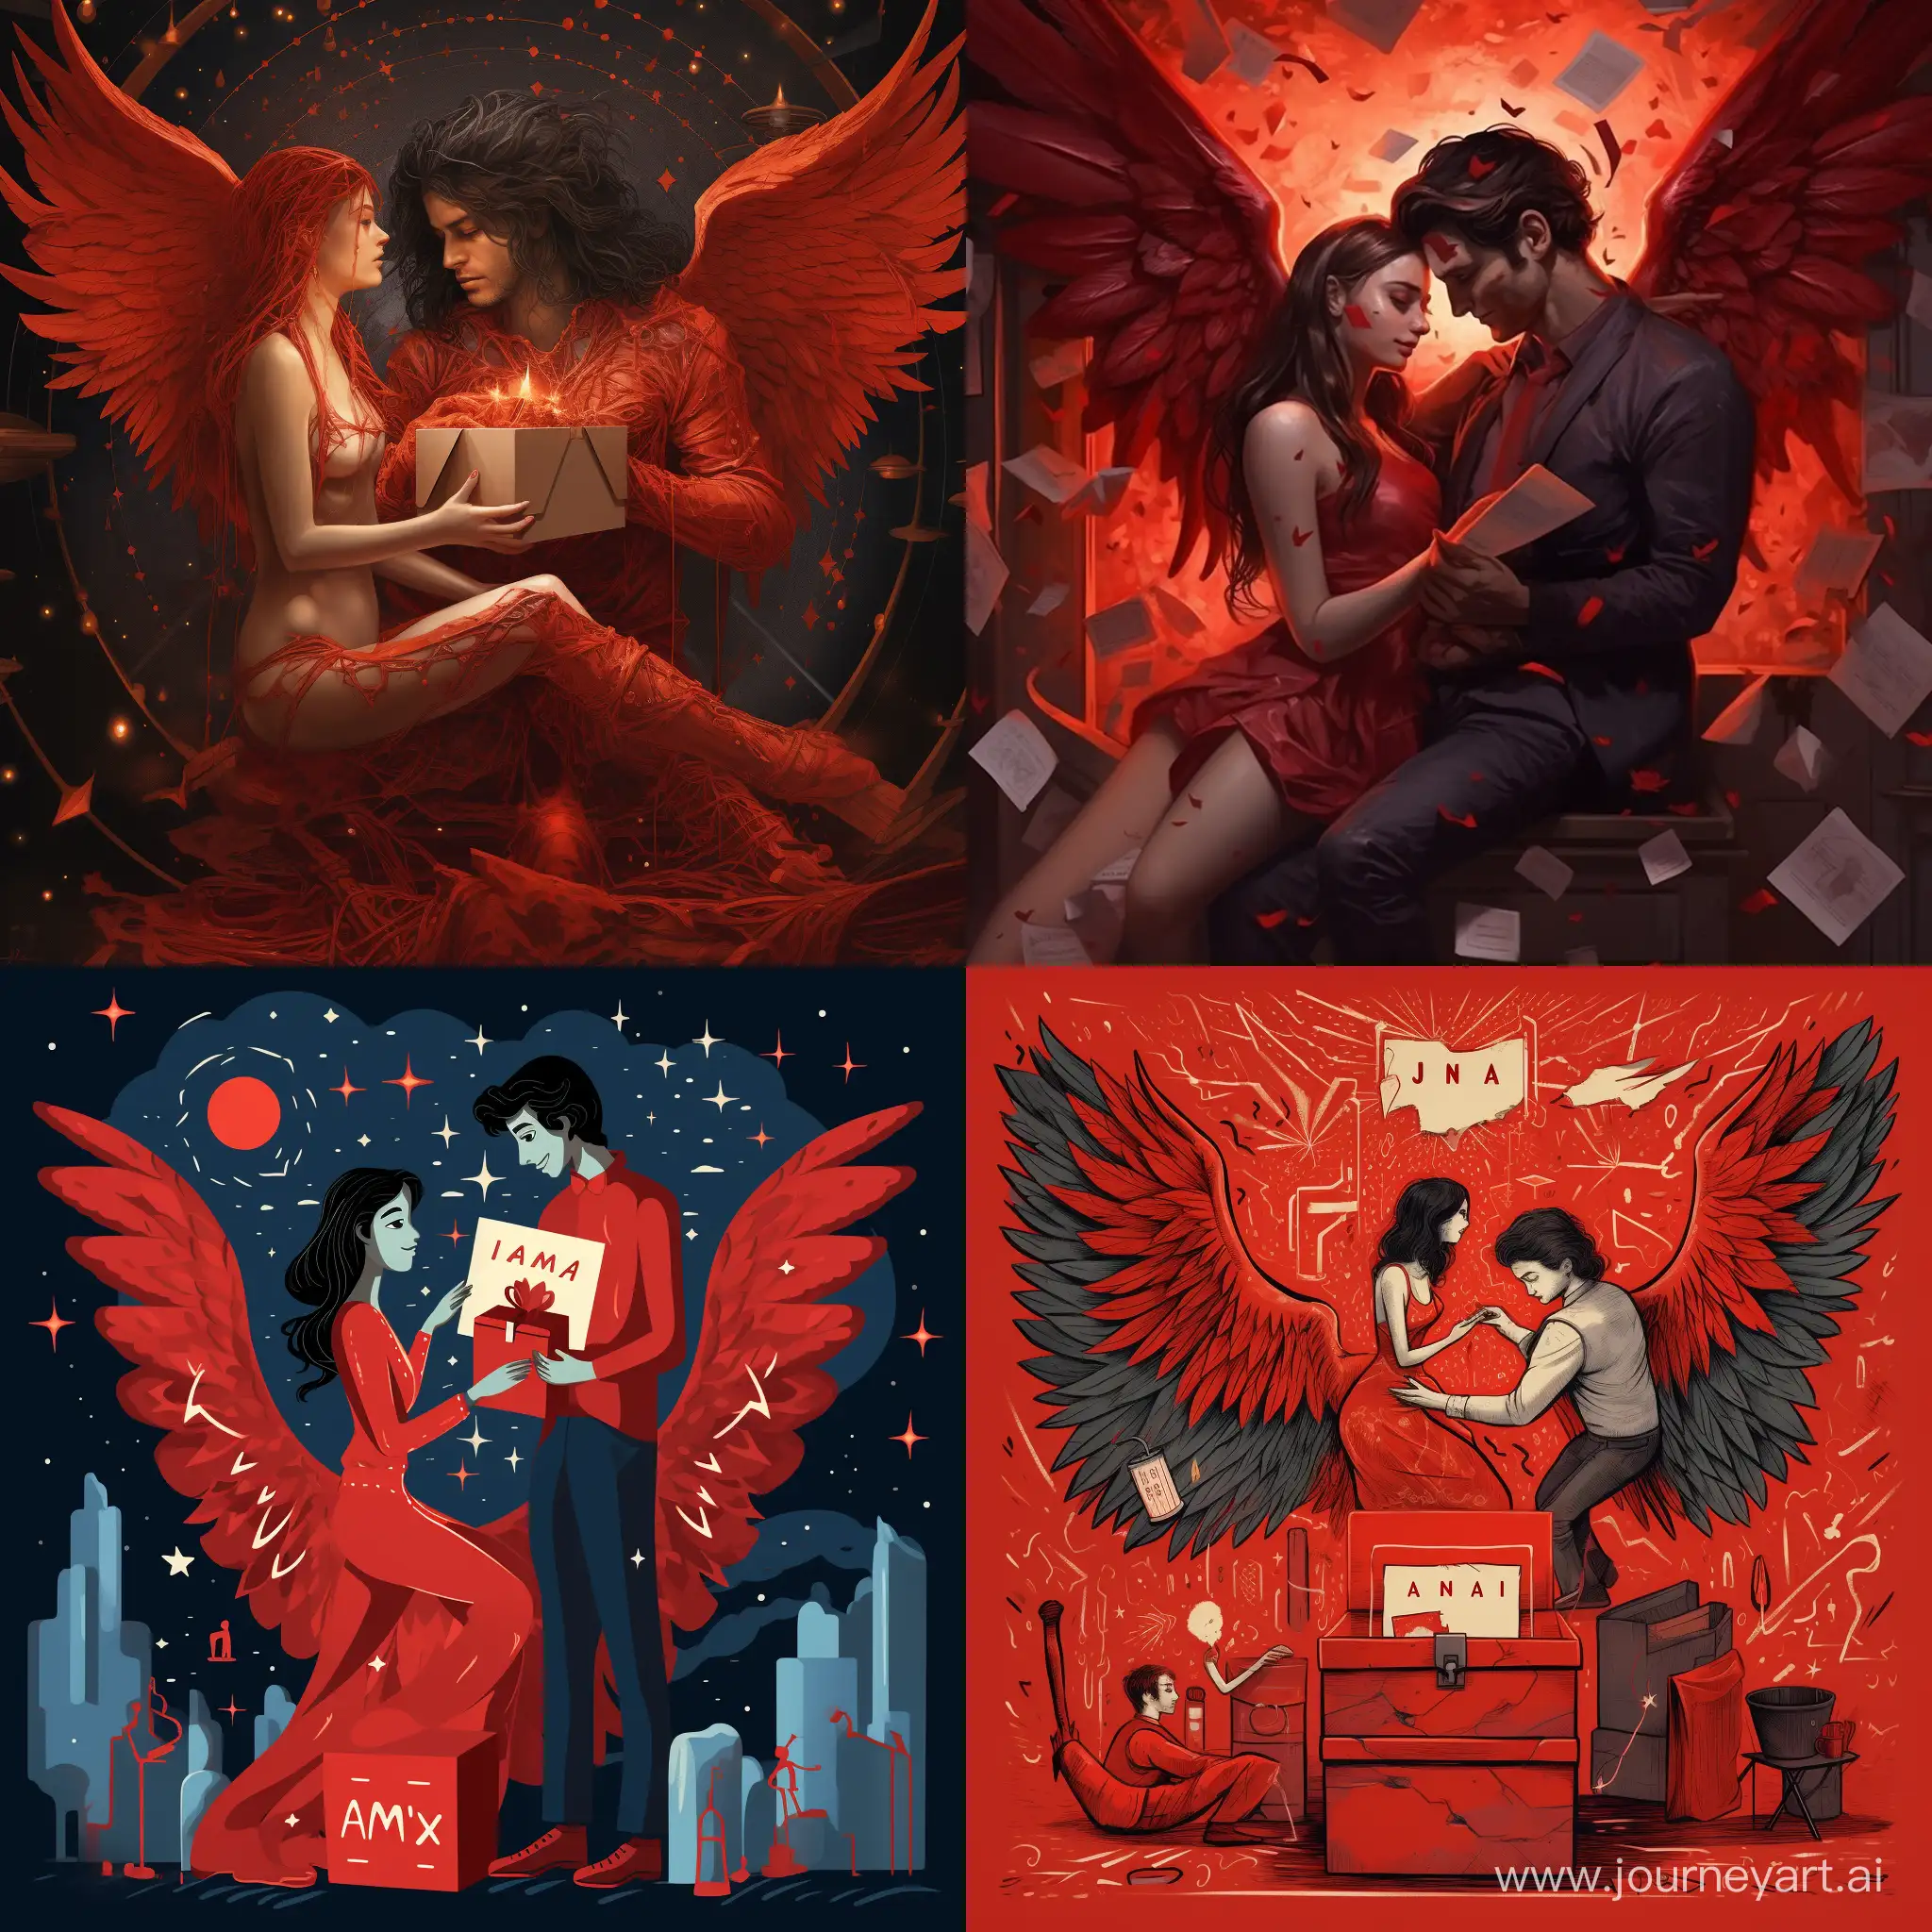 A demon from the jinn, wearing a beautiful red suit, loves a person and gives him a box with the letter A written on it, and her heart is broken, and behind her are many wings, stars, planes, and missiles.